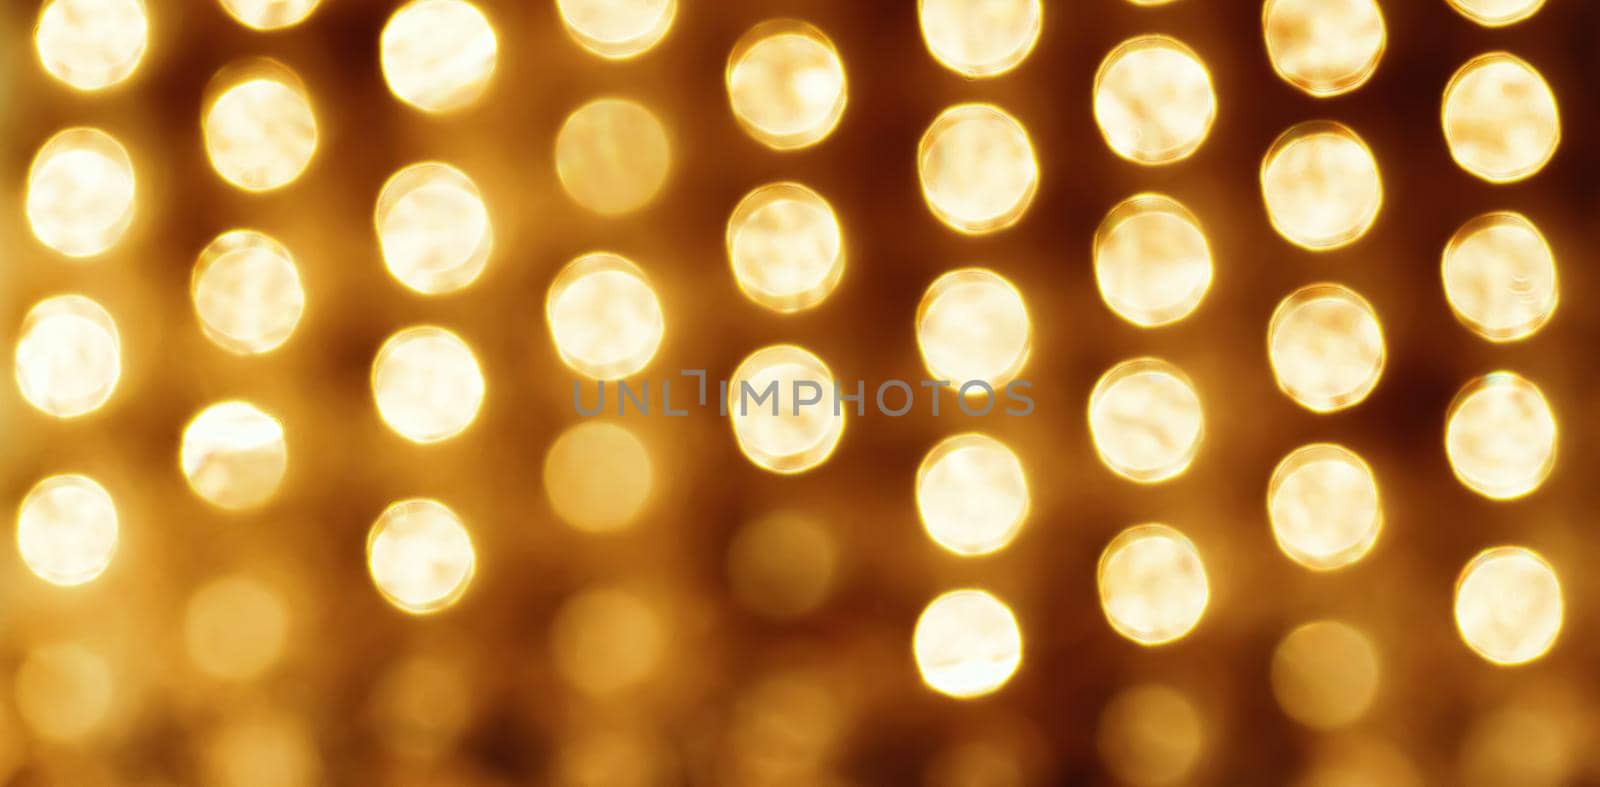 Vintage holiday lights as abstract background for Christmas and New Year design.